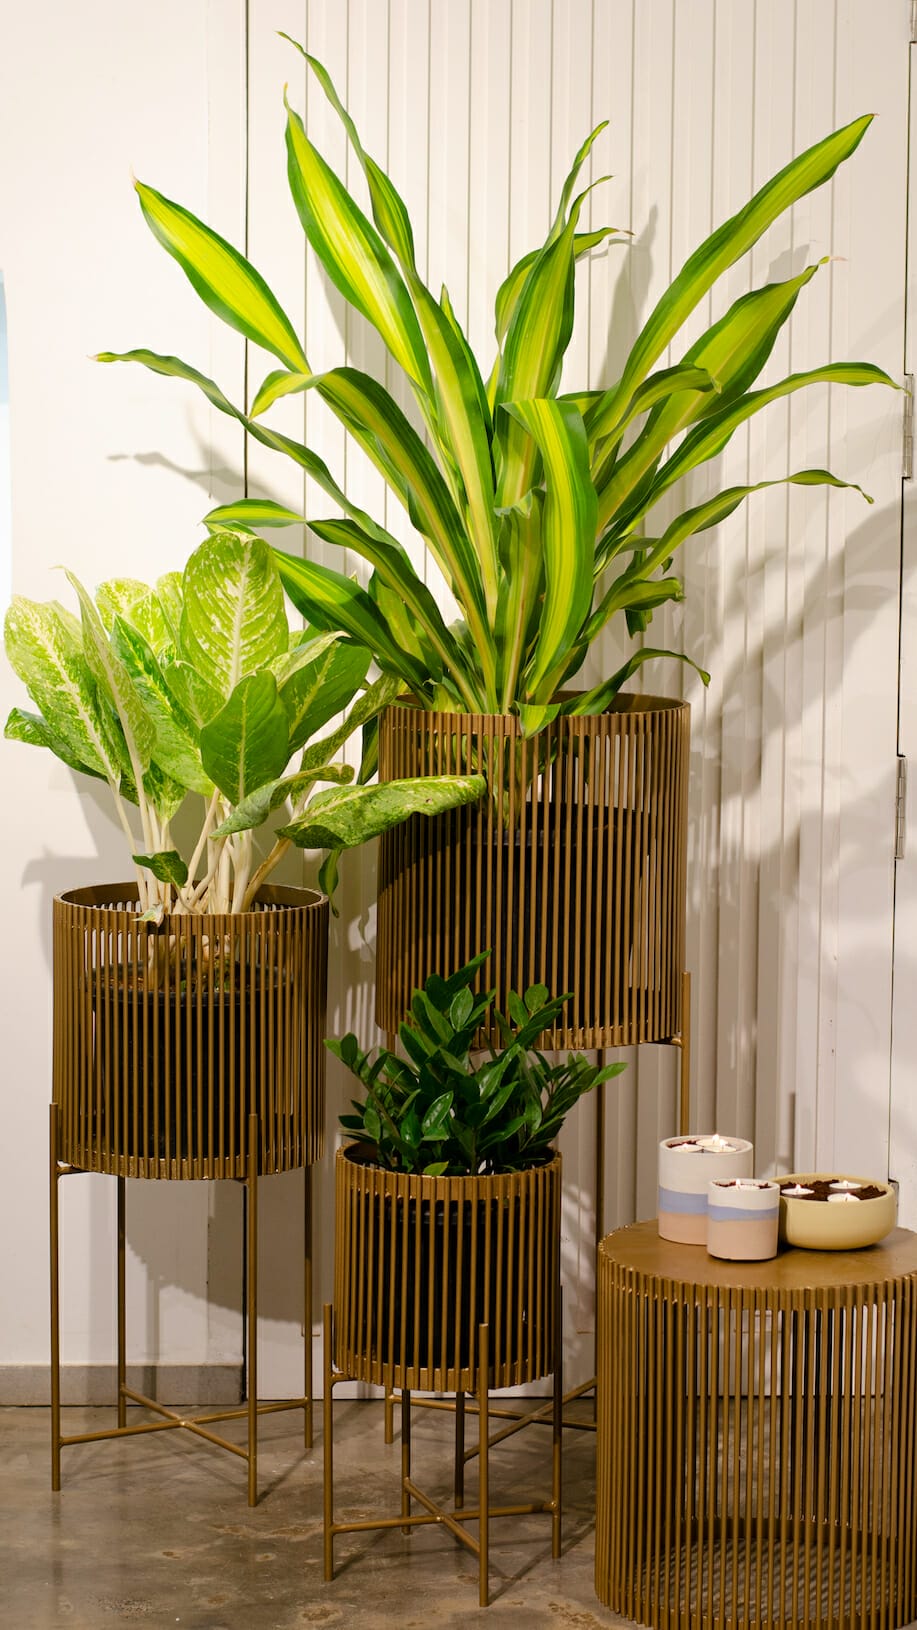 Studio Palasa by sibling duo Prinston and Preine unleashes the new realms of planters